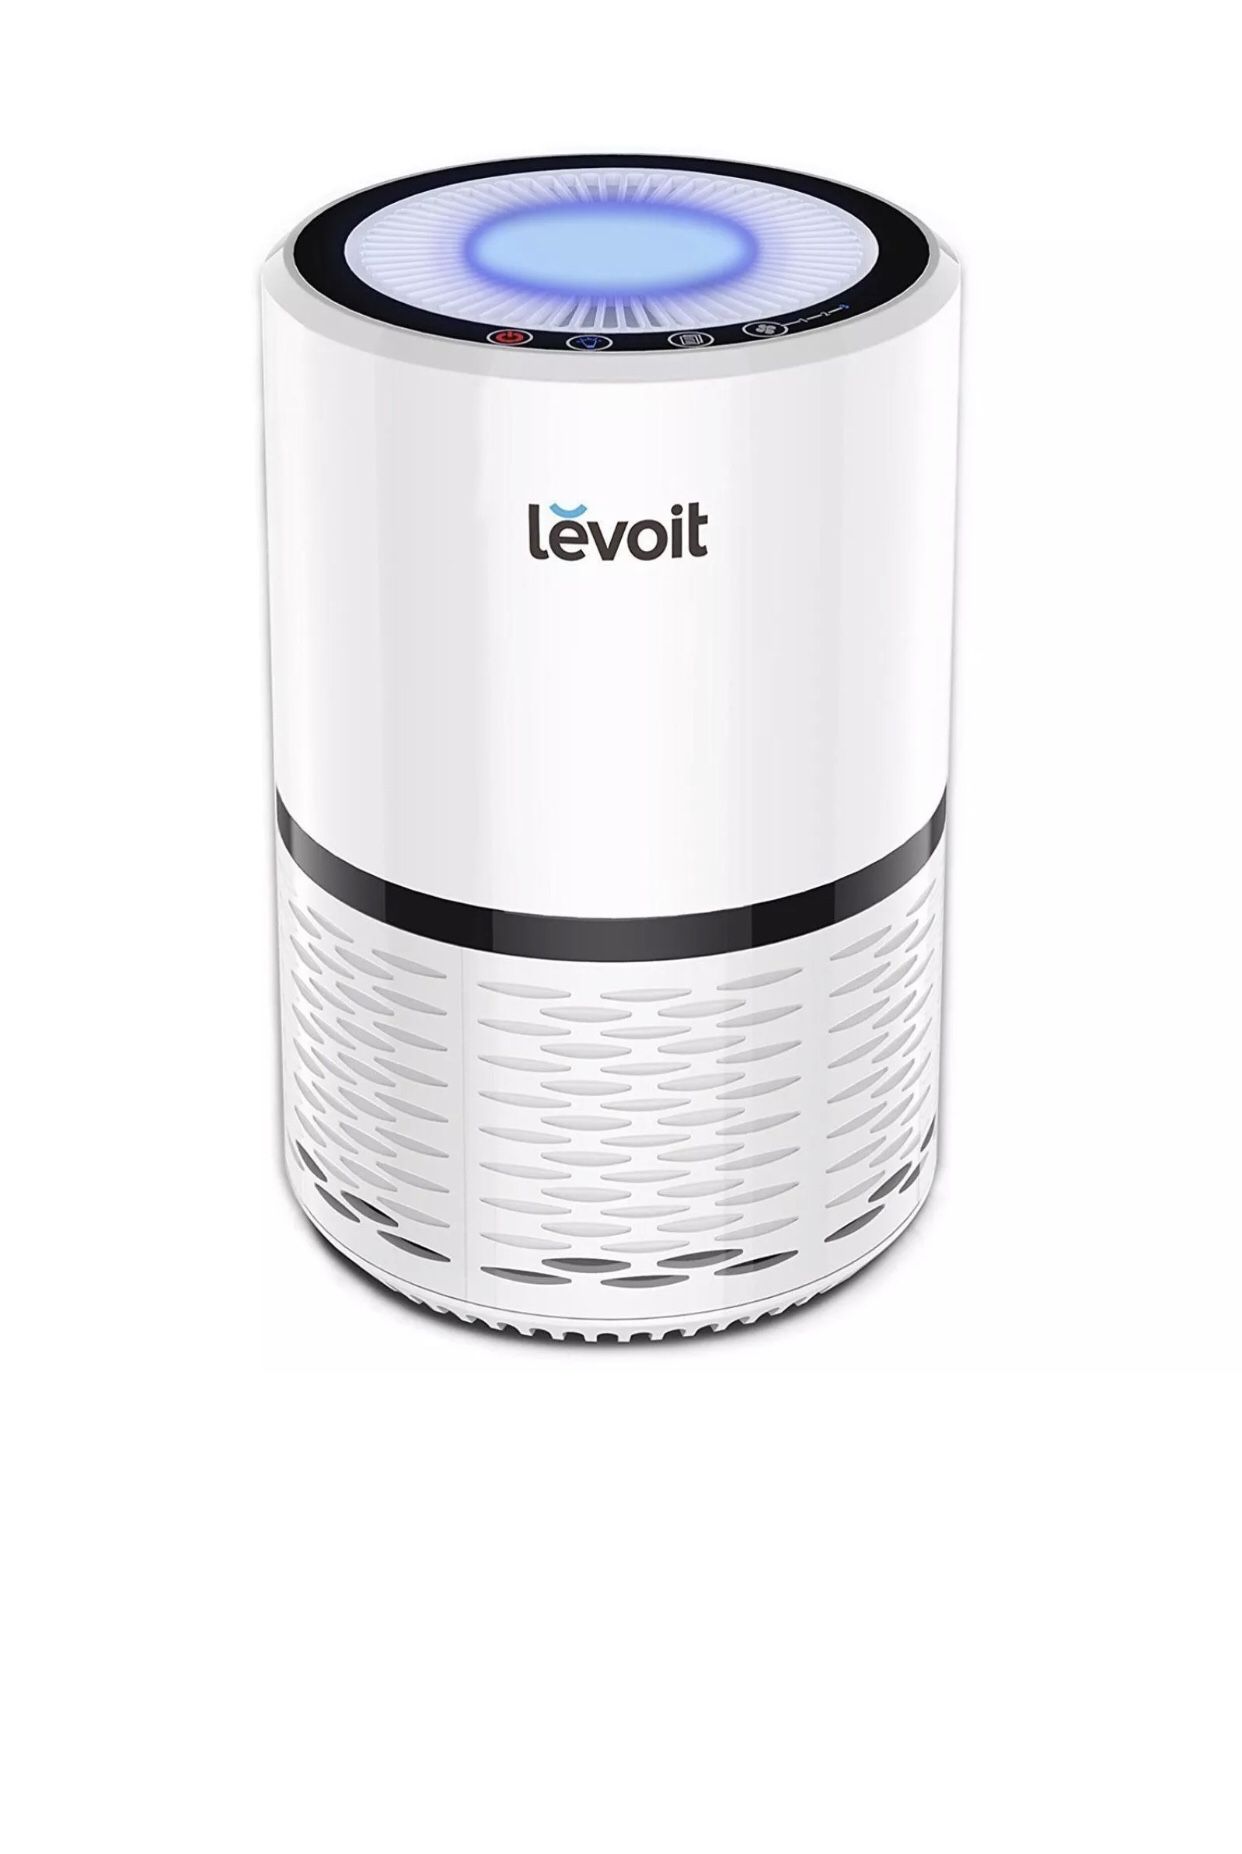 LEVOIT LV-H132 Air Purifier for Home with True HEPA Filter, Allergies Eliminated